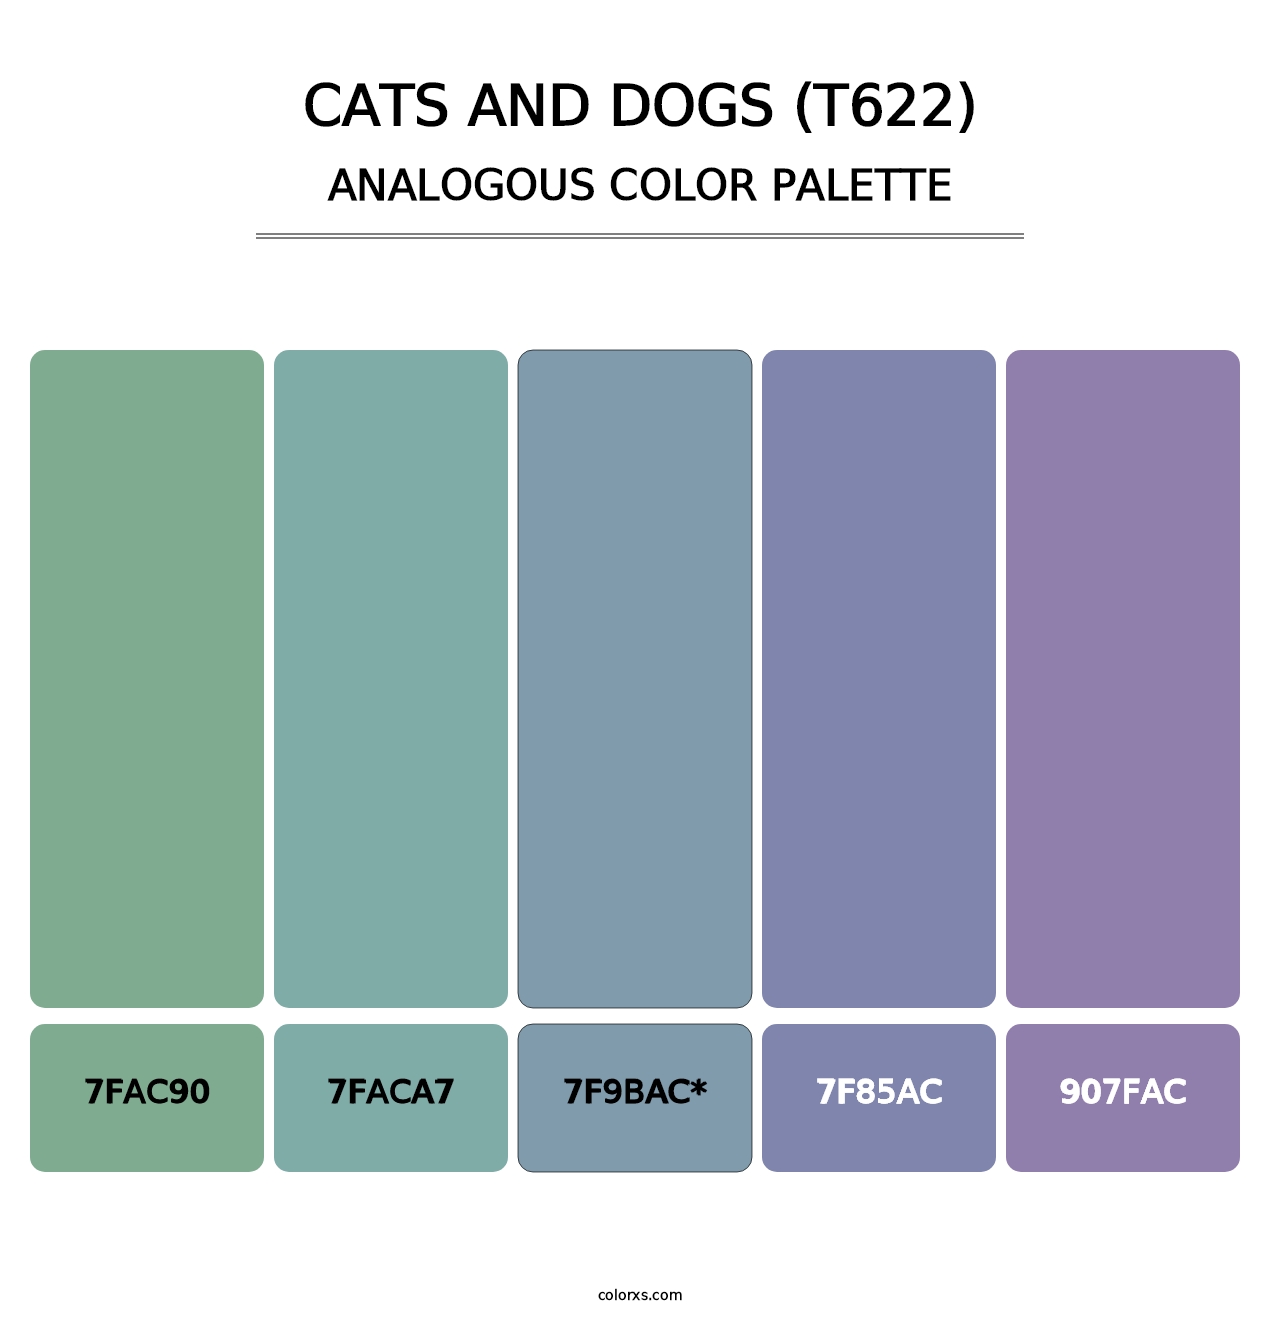 Cats and Dogs (T622) - Analogous Color Palette